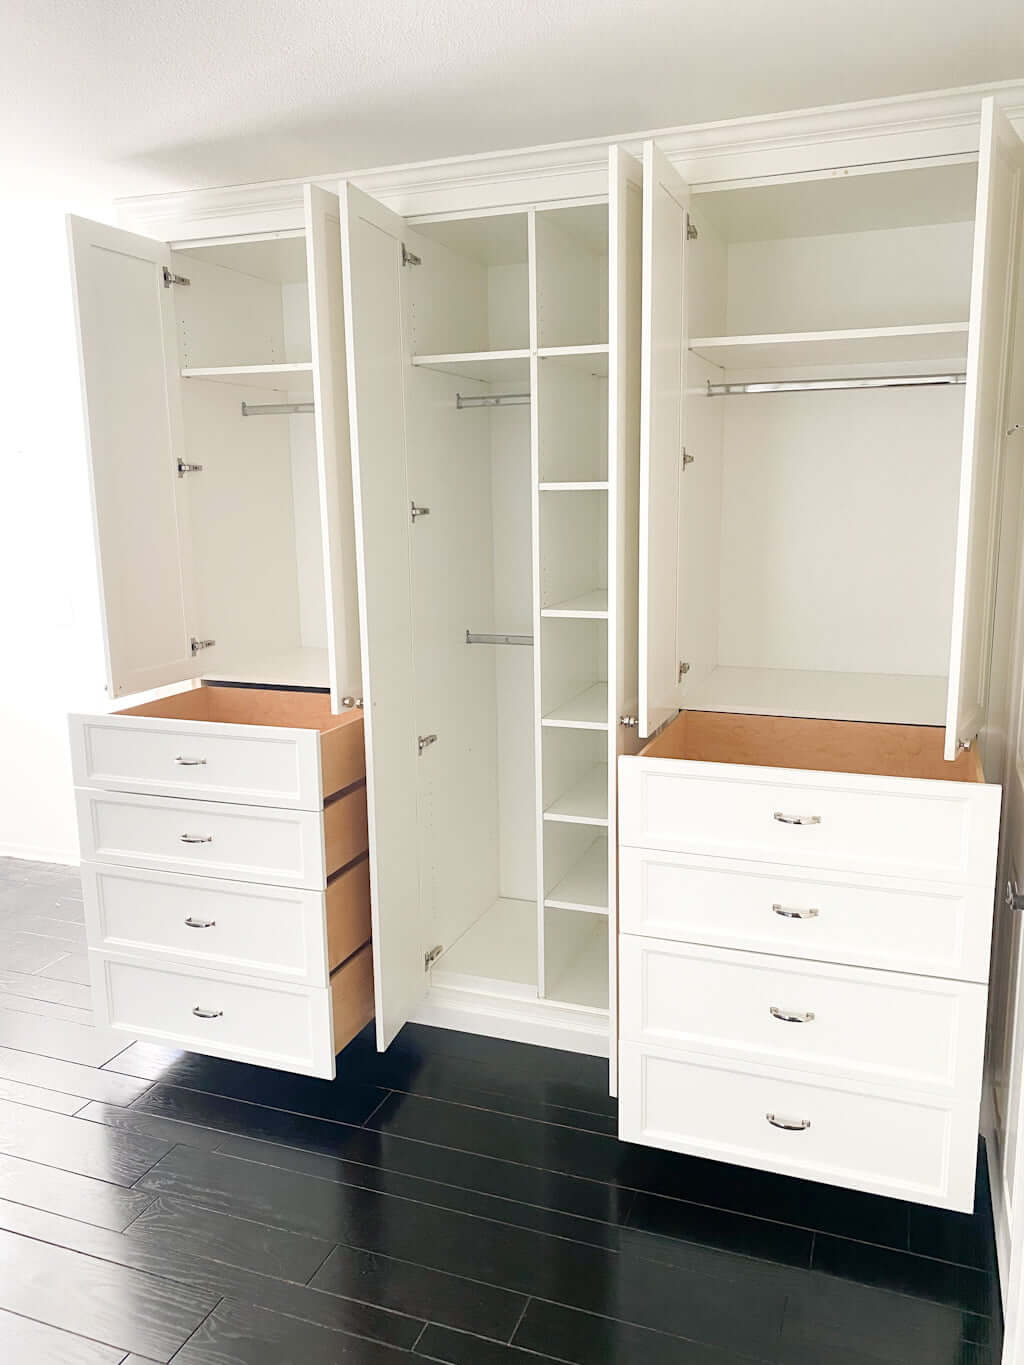 built in closet drawers in wall, wardrobe space with hangers in bedroom